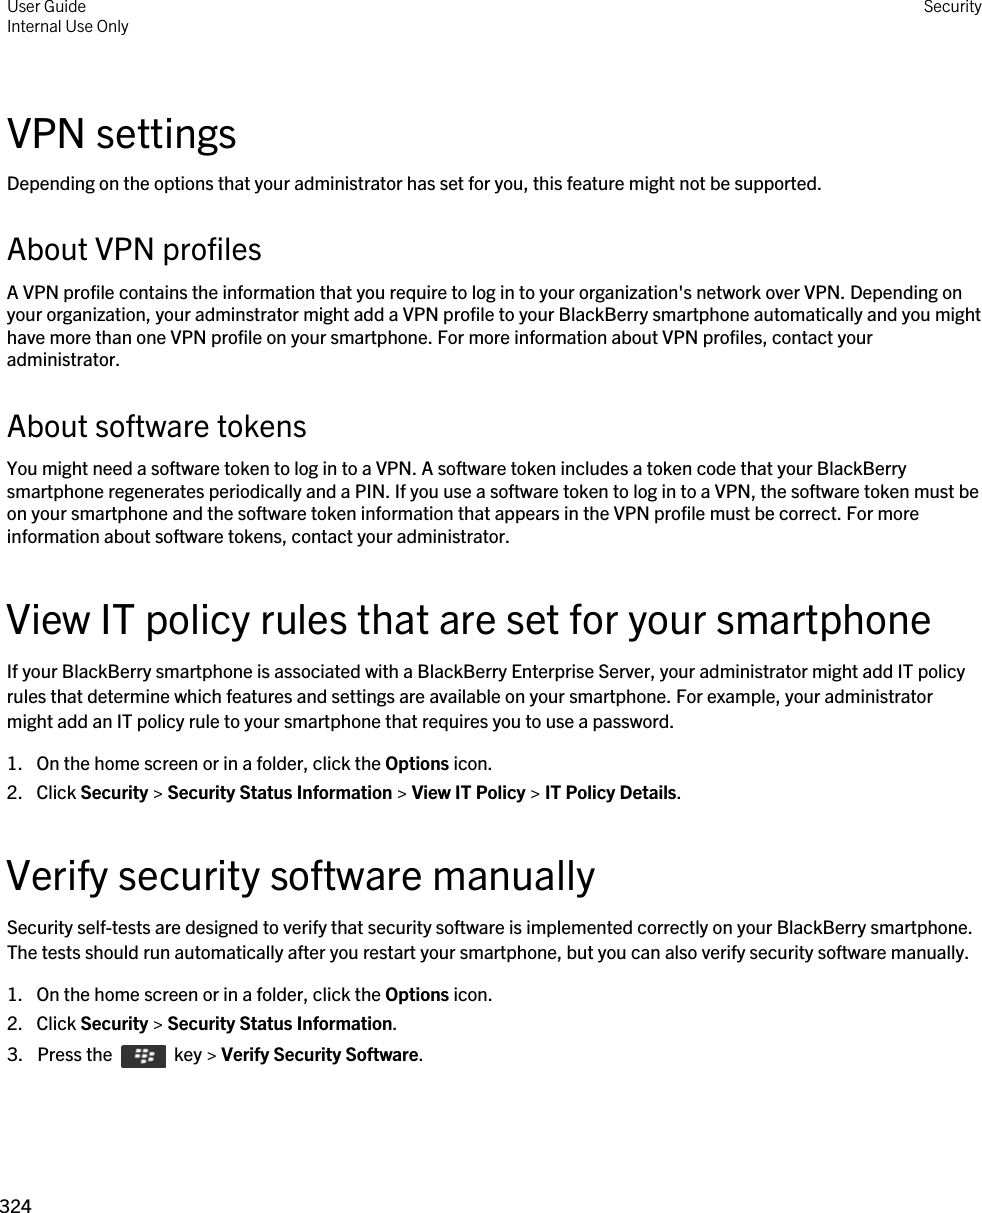 VPN settingsDepending on the options that your administrator has set for you, this feature might not be supported.About VPN profilesA VPN profile contains the information that you require to log in to your organization&apos;s network over VPN. Depending on your organization, your adminstrator might add a VPN profile to your BlackBerry smartphone automatically and you might have more than one VPN profile on your smartphone. For more information about VPN profiles, contact your administrator.About software tokensYou might need a software token to log in to a VPN. A software token includes a token code that your BlackBerry smartphone regenerates periodically and a PIN. If you use a software token to log in to a VPN, the software token must be on your smartphone and the software token information that appears in the VPN profile must be correct. For more information about software tokens, contact your administrator.View IT policy rules that are set for your smartphoneIf your BlackBerry smartphone is associated with a BlackBerry Enterprise Server, your administrator might add IT policy rules that determine which features and settings are available on your smartphone. For example, your administrator might add an IT policy rule to your smartphone that requires you to use a password.1. On the home screen or in a folder, click the Options icon.2. Click Security &gt; Security Status Information &gt; View IT Policy &gt; IT Policy Details.Verify security software manuallySecurity self-tests are designed to verify that security software is implemented correctly on your BlackBerry smartphone. The tests should run automatically after you restart your smartphone, but you can also verify security software manually.1. On the home screen or in a folder, click the Options icon.2. Click Security &gt; Security Status Information.3.  Press the    key &gt; Verify Security Software. User GuideInternal Use Only Security324 